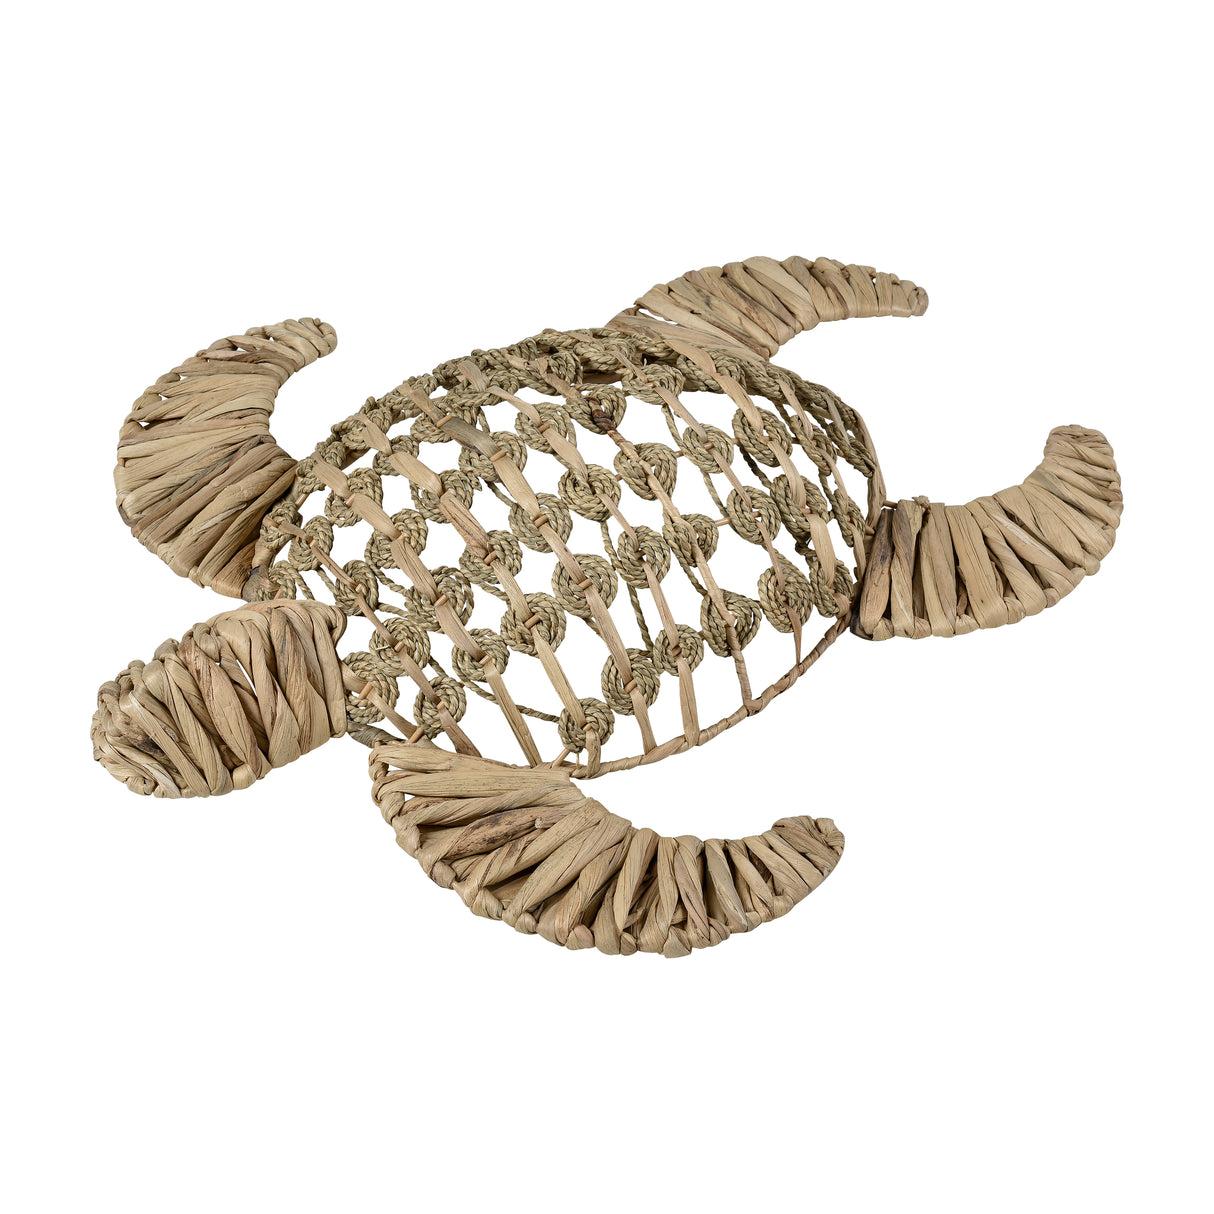 Elk S0067-11272 Ridley Turtle Object - Large Natural